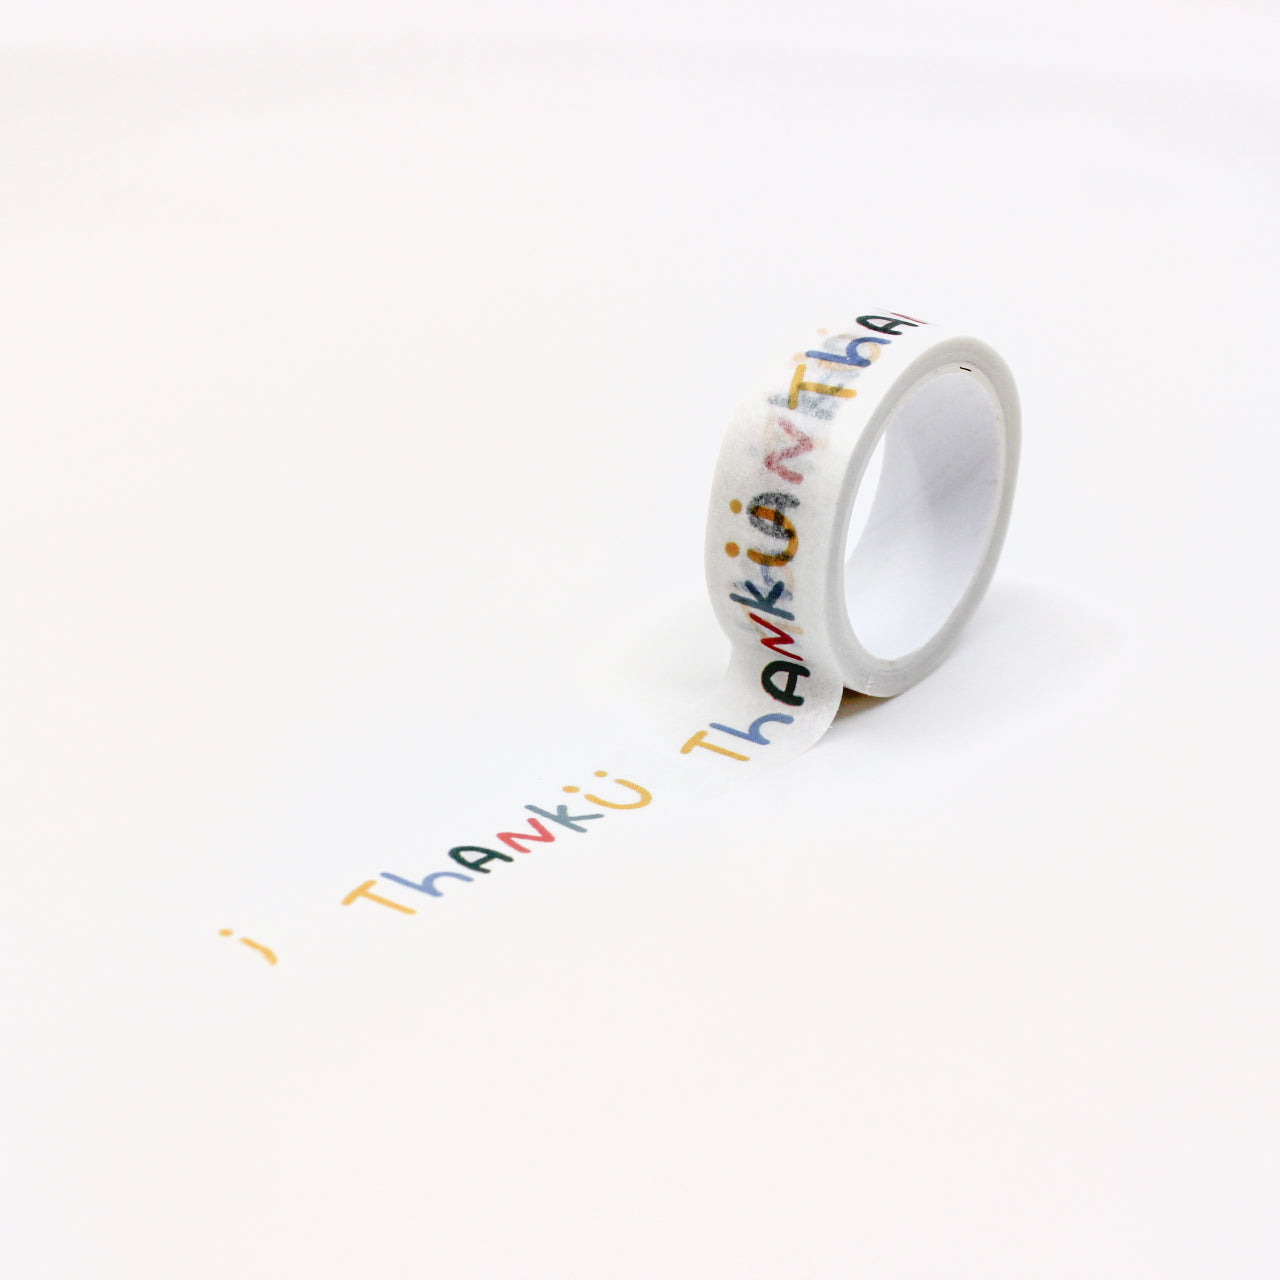 Vibrant washi tape featuring the words 'Thank U' alongside a cheerful smiling face. This playful design on a crisp white background adds a touch of gratitude and joy to your crafting projects. This tape is sold at BBB Supplies Craft Shop.